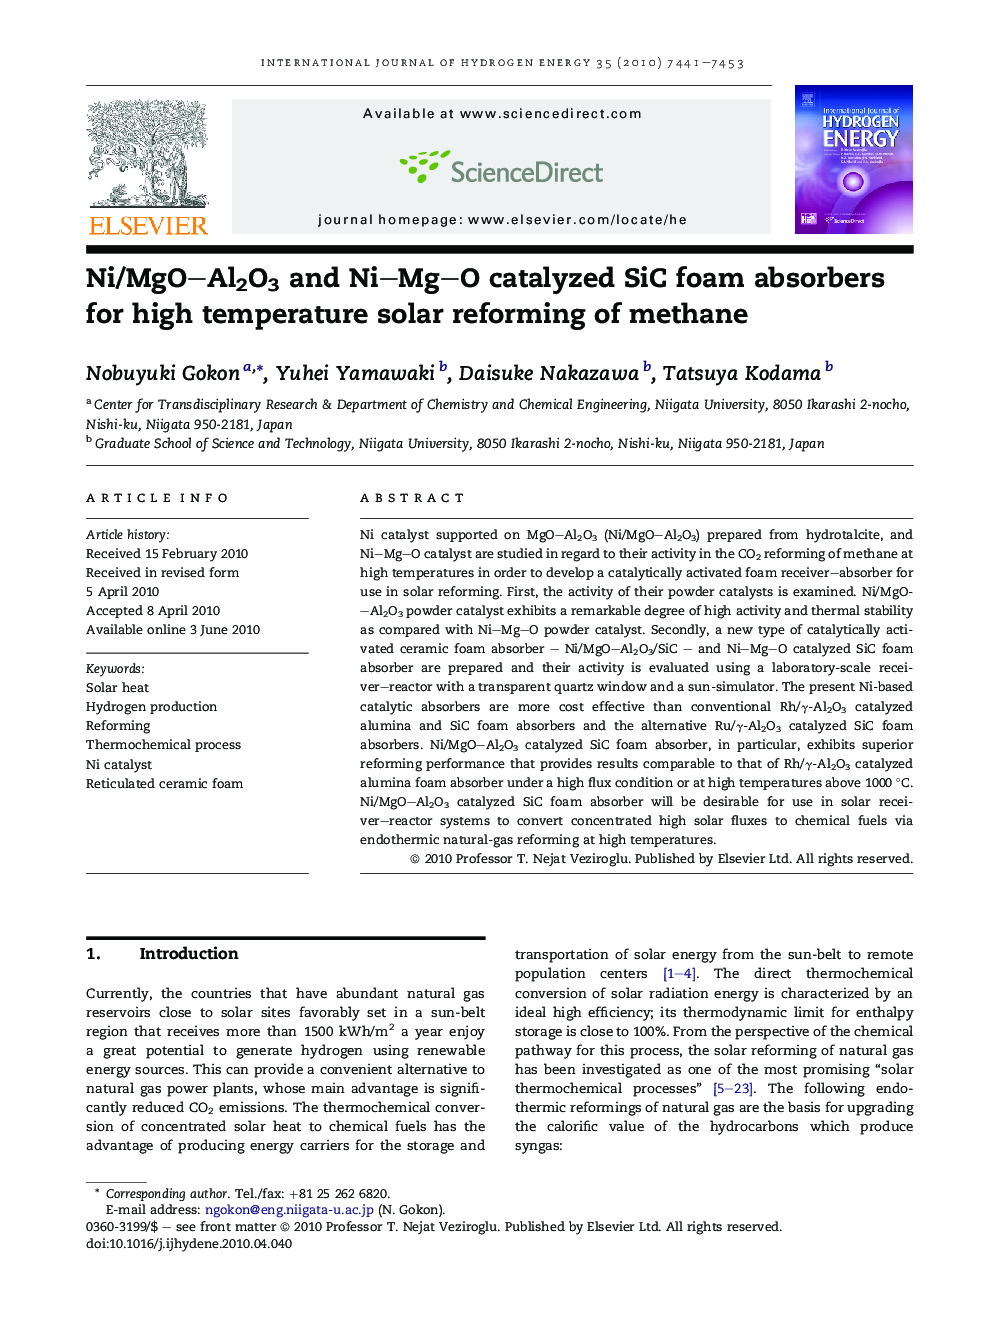 Ni/MgO–Al2O3 and Ni–Mg–O catalyzed SiC foam absorbers for high temperature solar reforming of methane